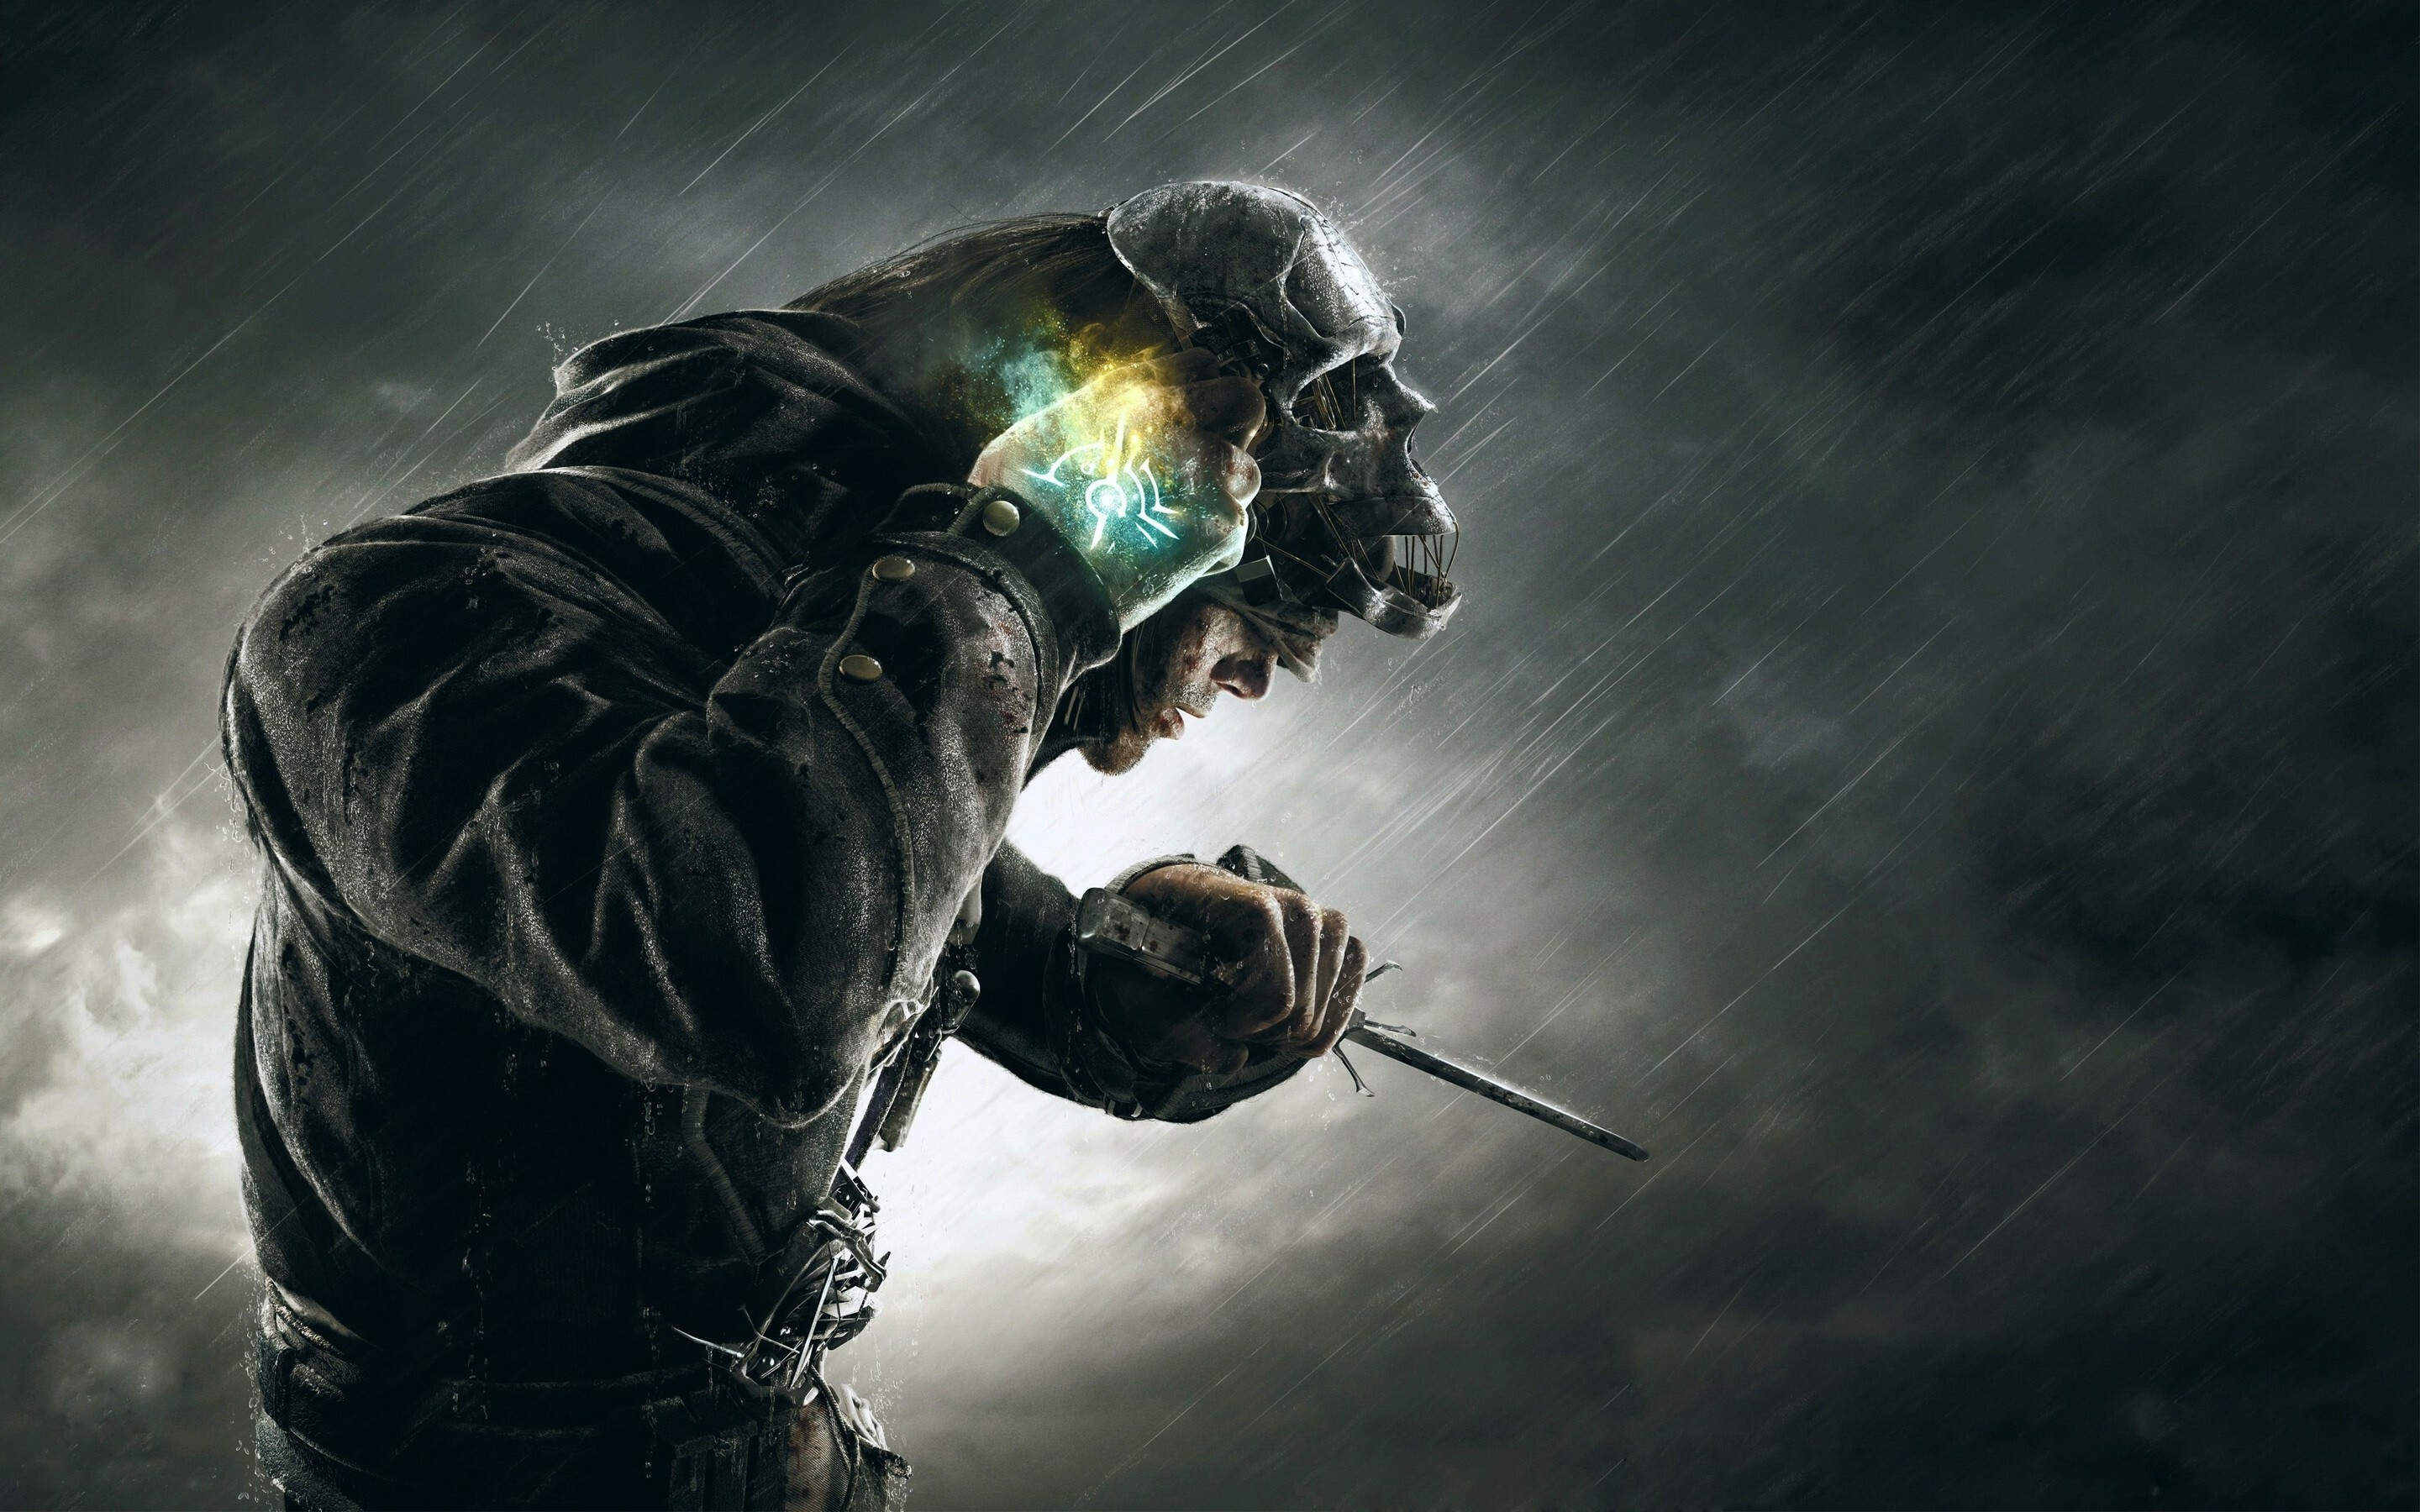 Dishonored: A first-person stealth action video game, Set in the plague-ravaged city of Dunwall. 2880x1800 HD Background.